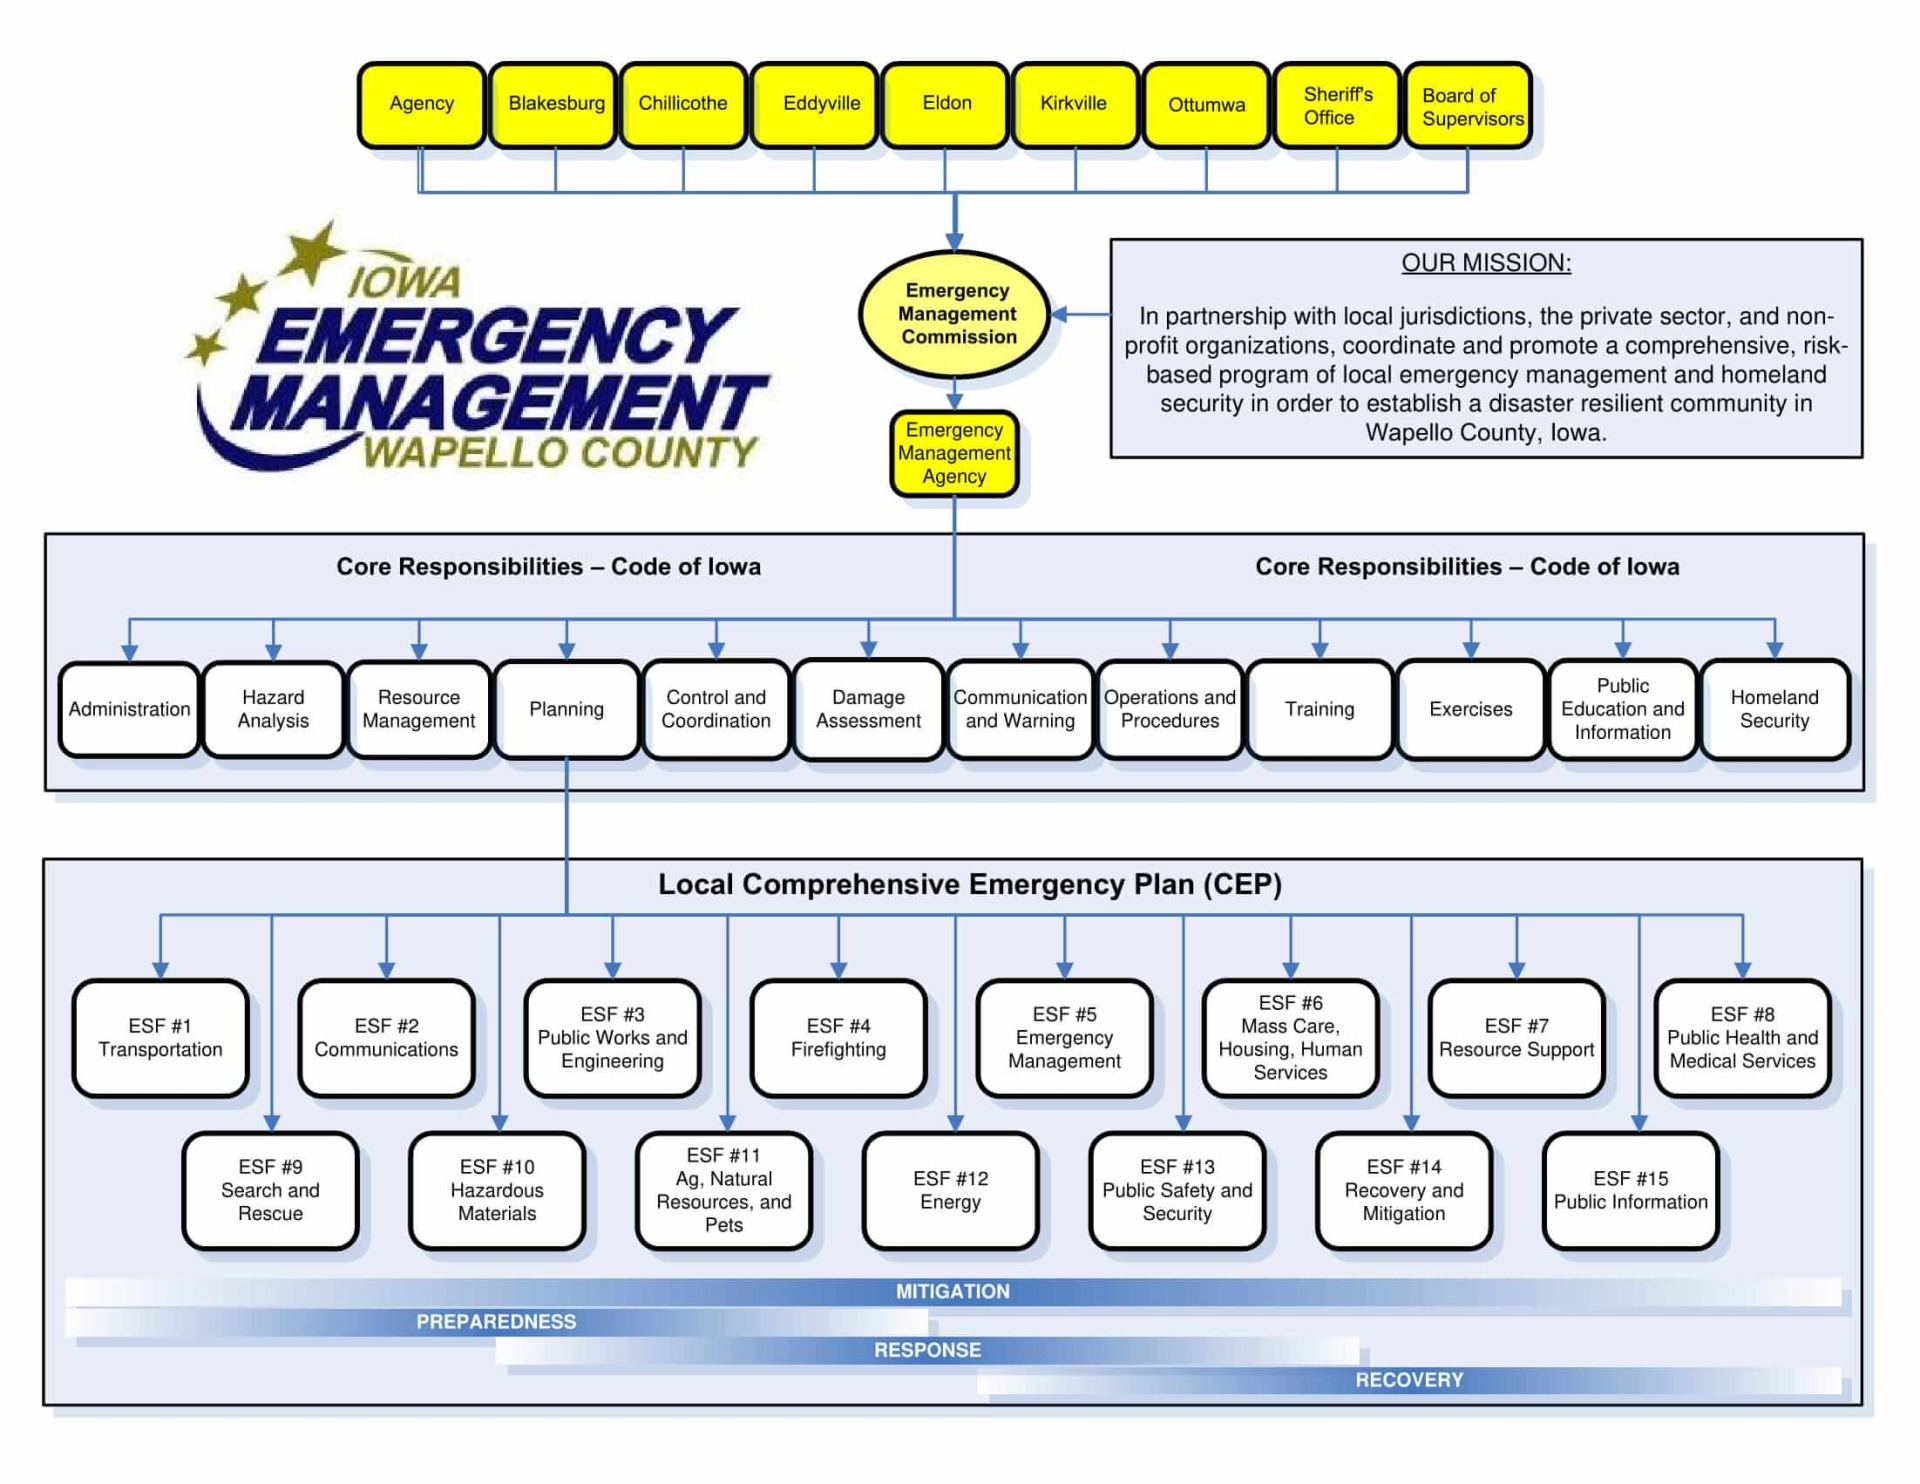 Chart of Emergency Management Wapello County's structure